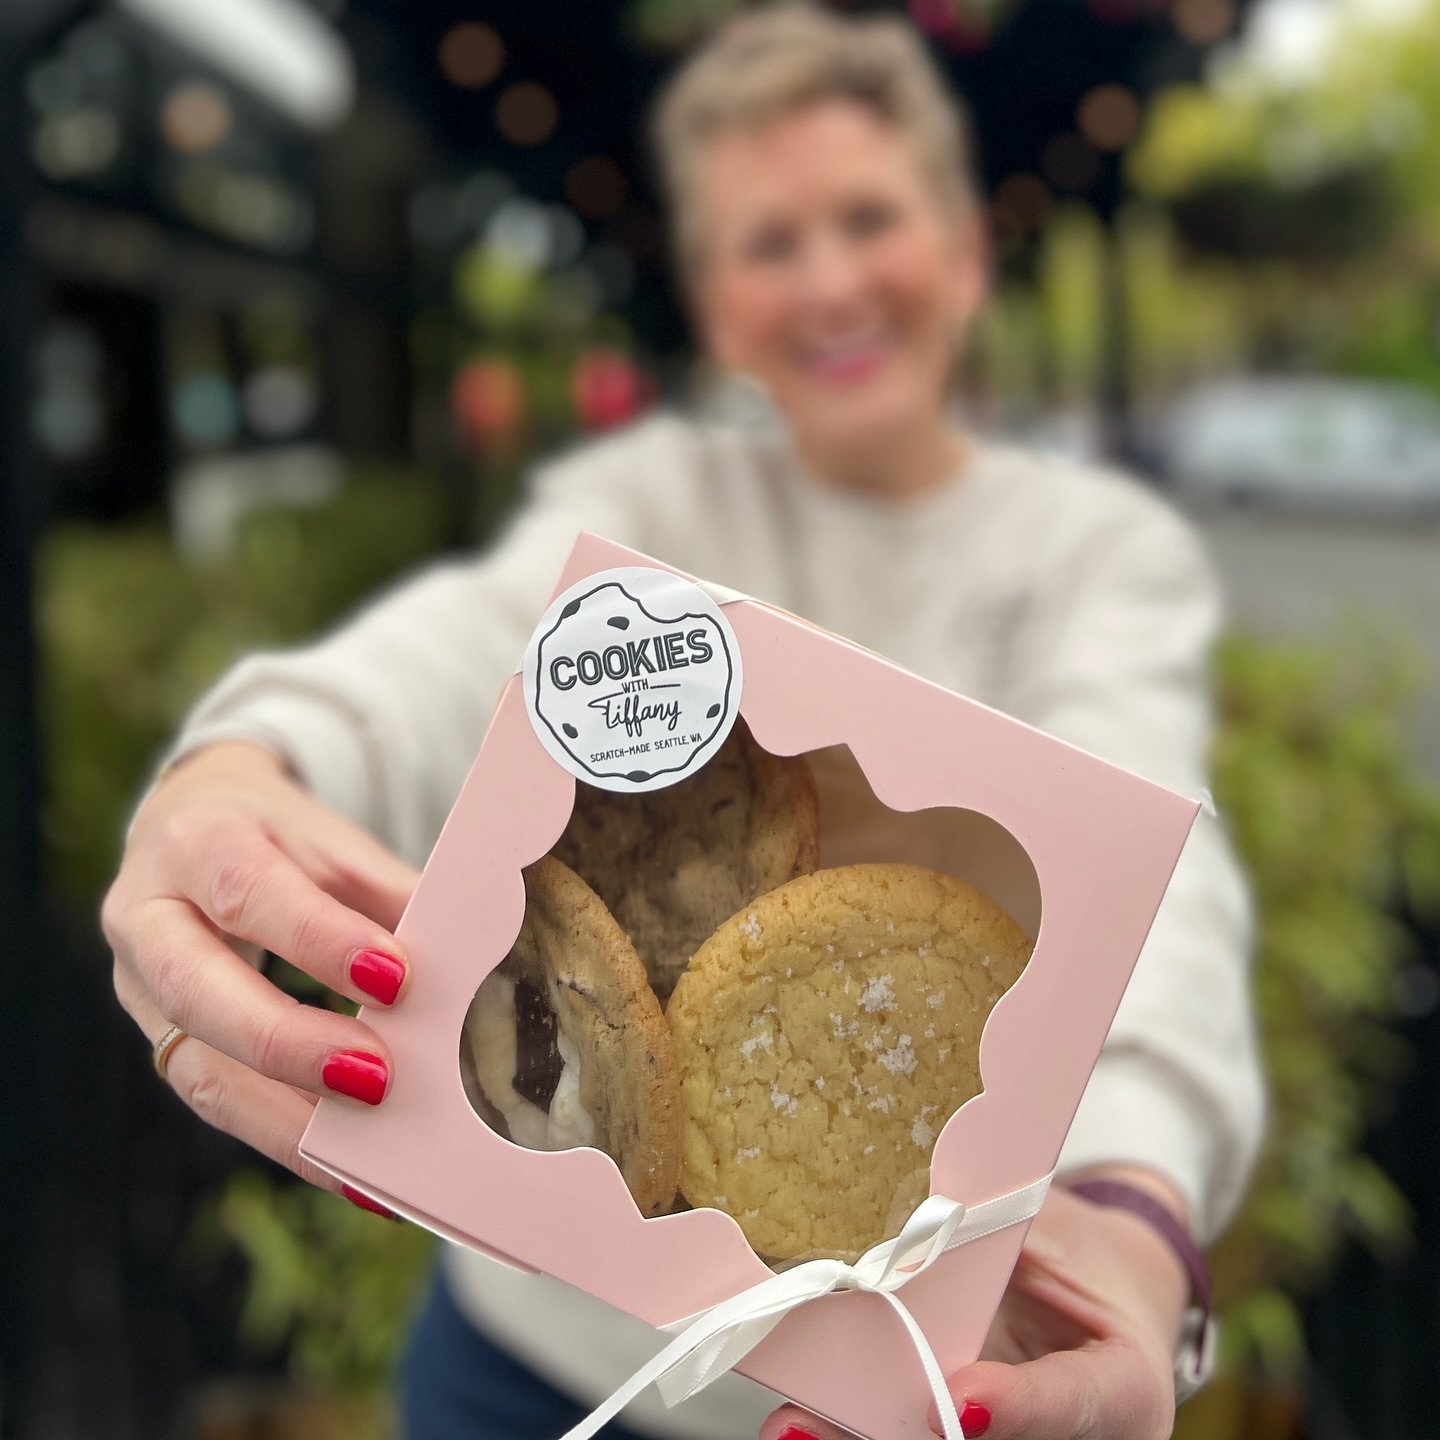 Surprise mom with a delicious treat this Mother&rsquo;s Day 🍪❤️✨

With Nationwide shipping (and the option to include a printed personalized message), you can have our cookies shipped directly to mom (or that motherly figure in your life). Get your 